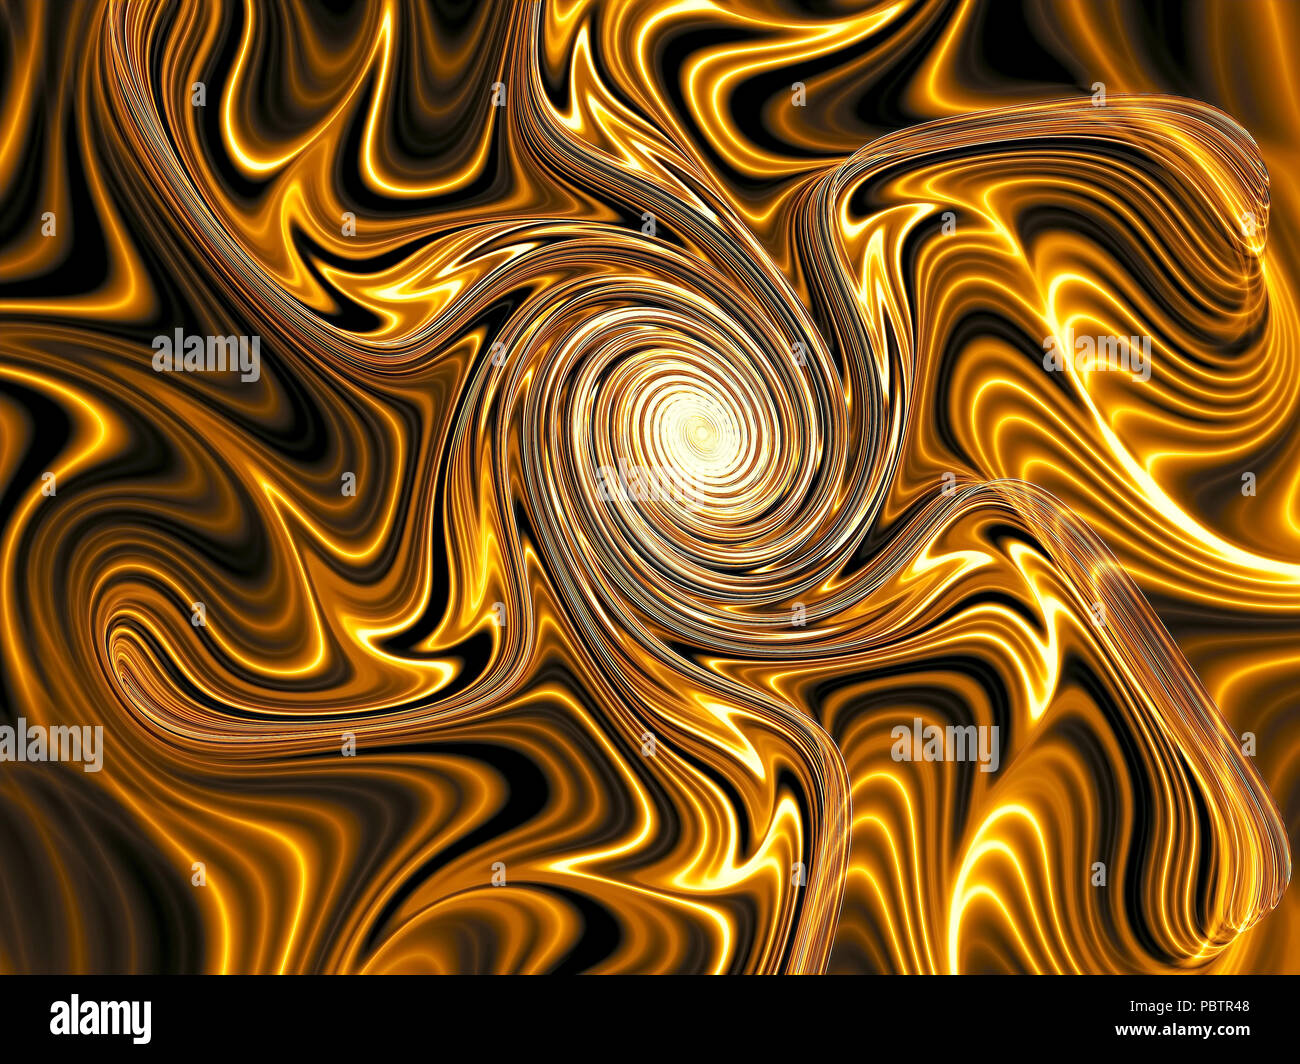 Abstract spiral background - digitally generated image Stock Photo